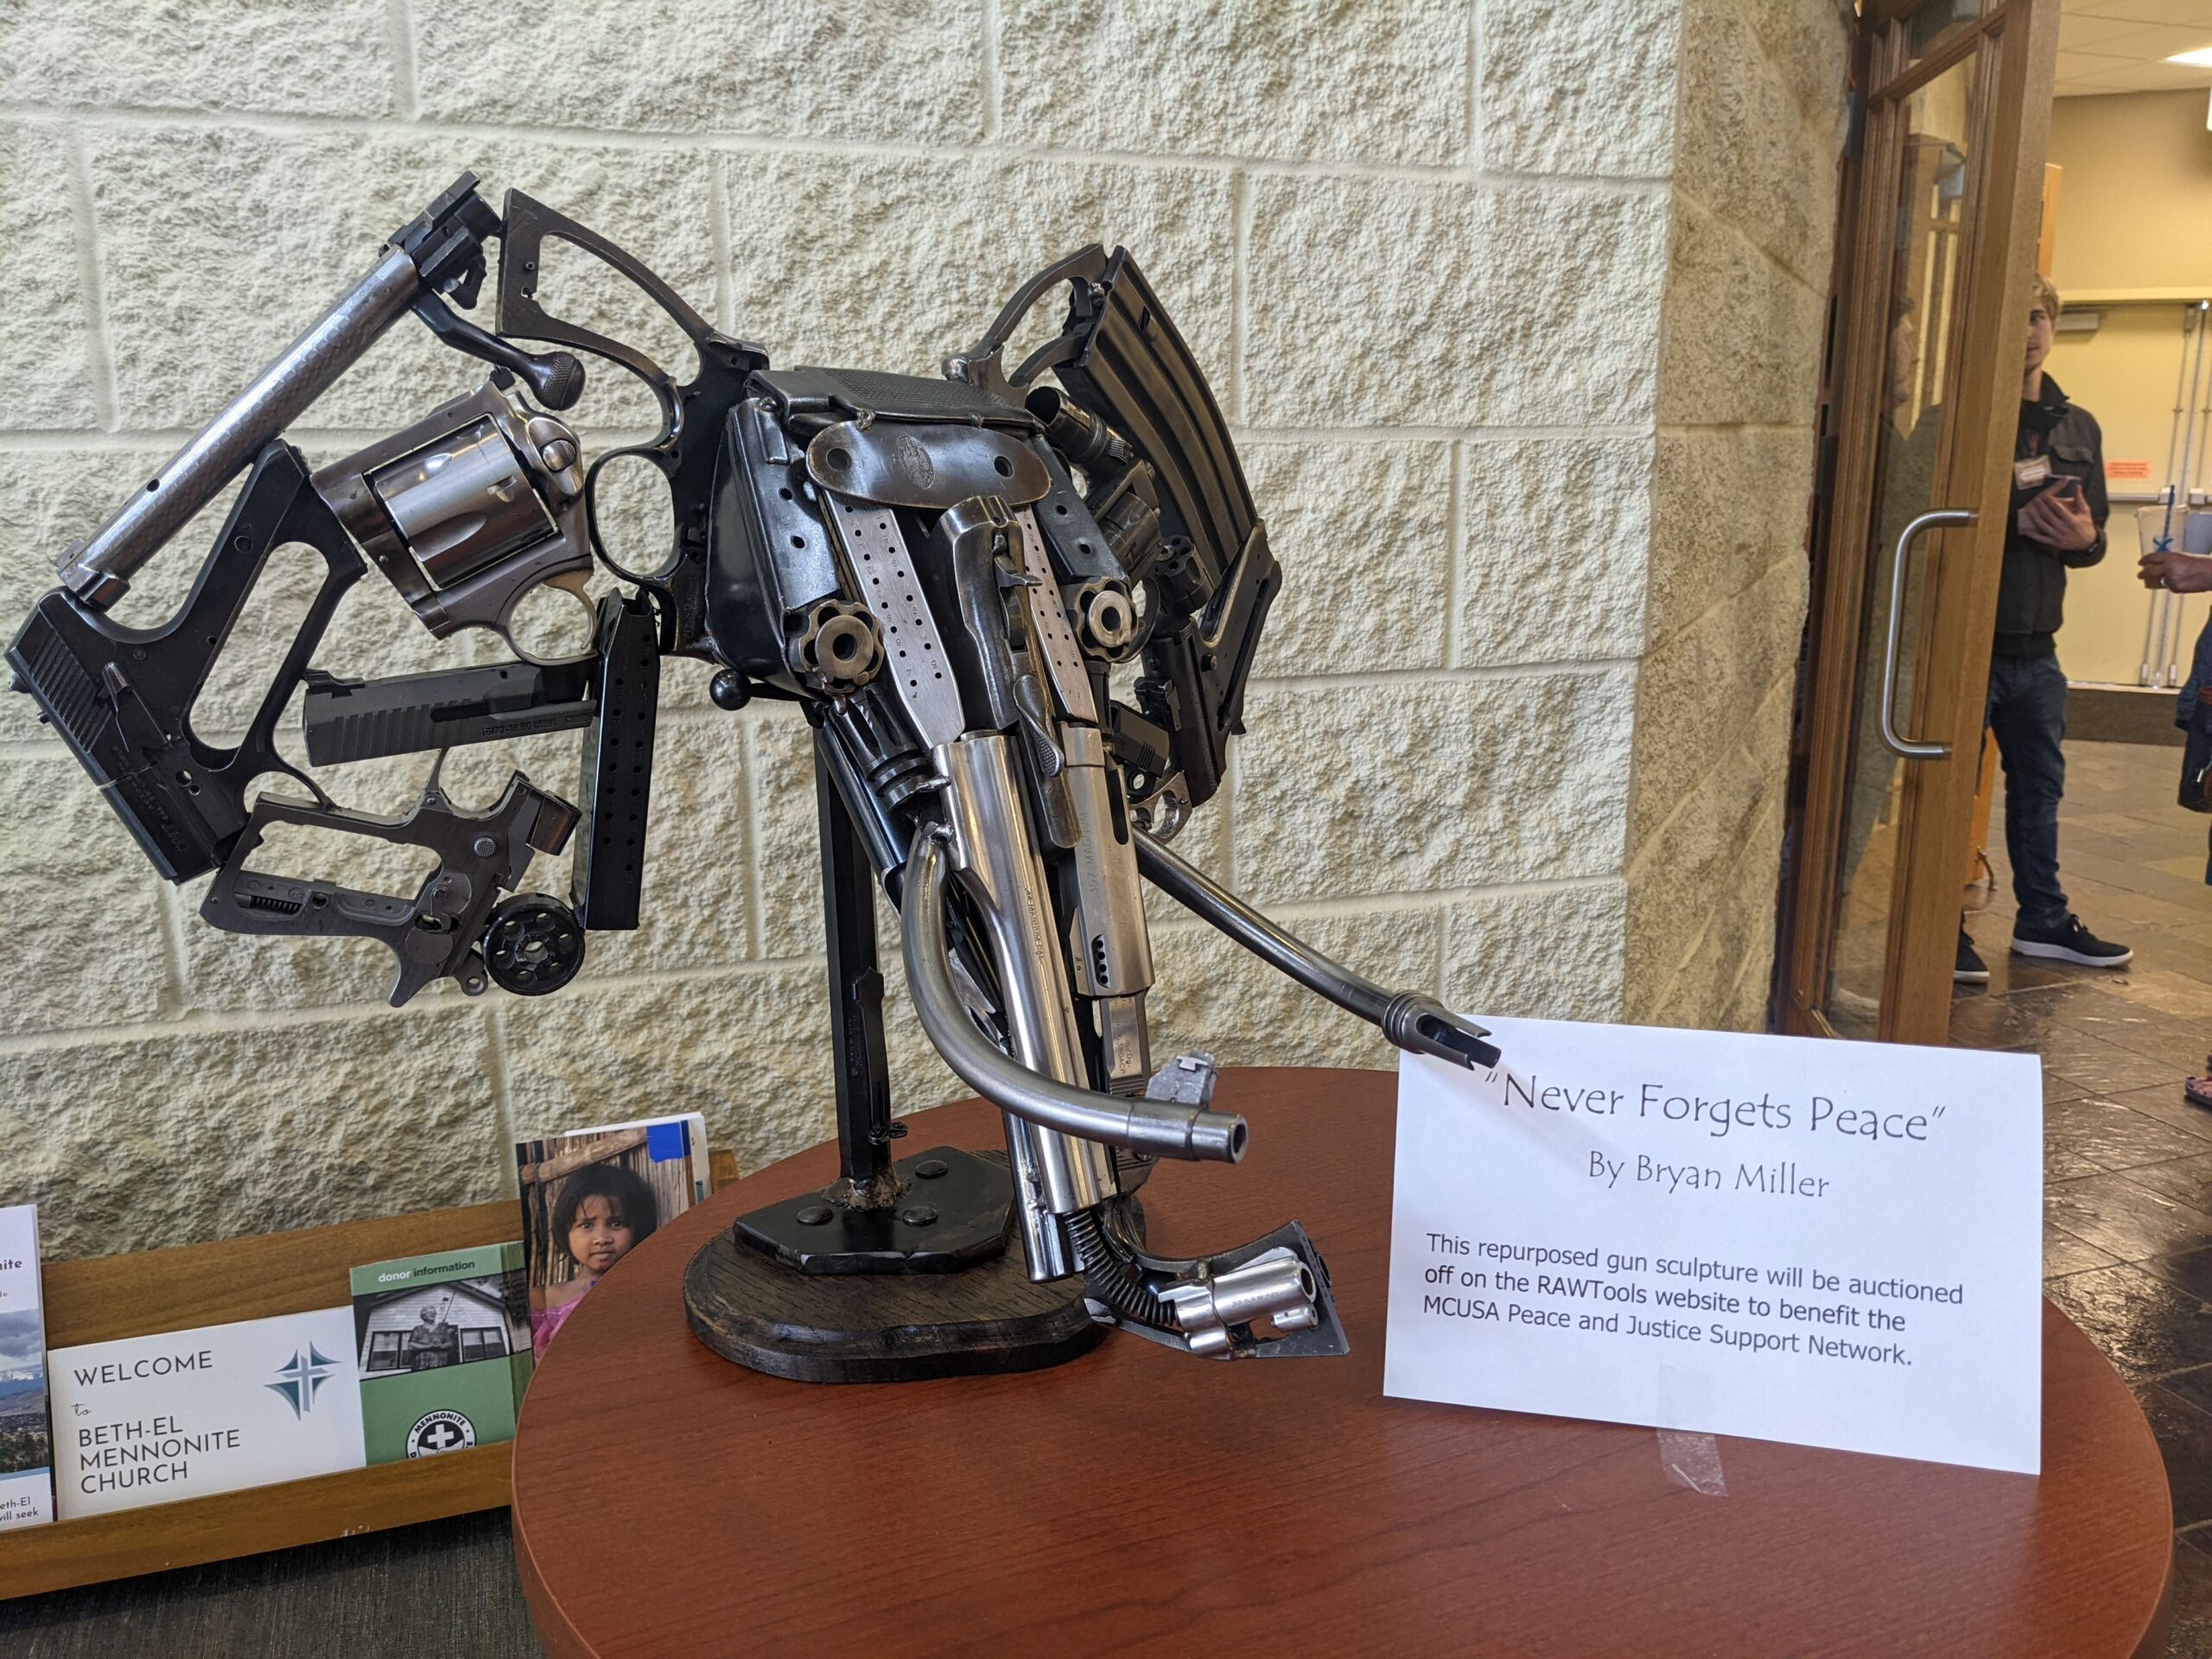 An image of a sculpture made from pieces of disassembled guns. The sculpture resembles an elephant's head and is accompanied by a placard reading, "'Never Forgets Peace' by Brian Miller This repurposed gun sculpture will be auctioned off on the RAWTools website to benefit the MCUSA Peace and Justice Support Network. 